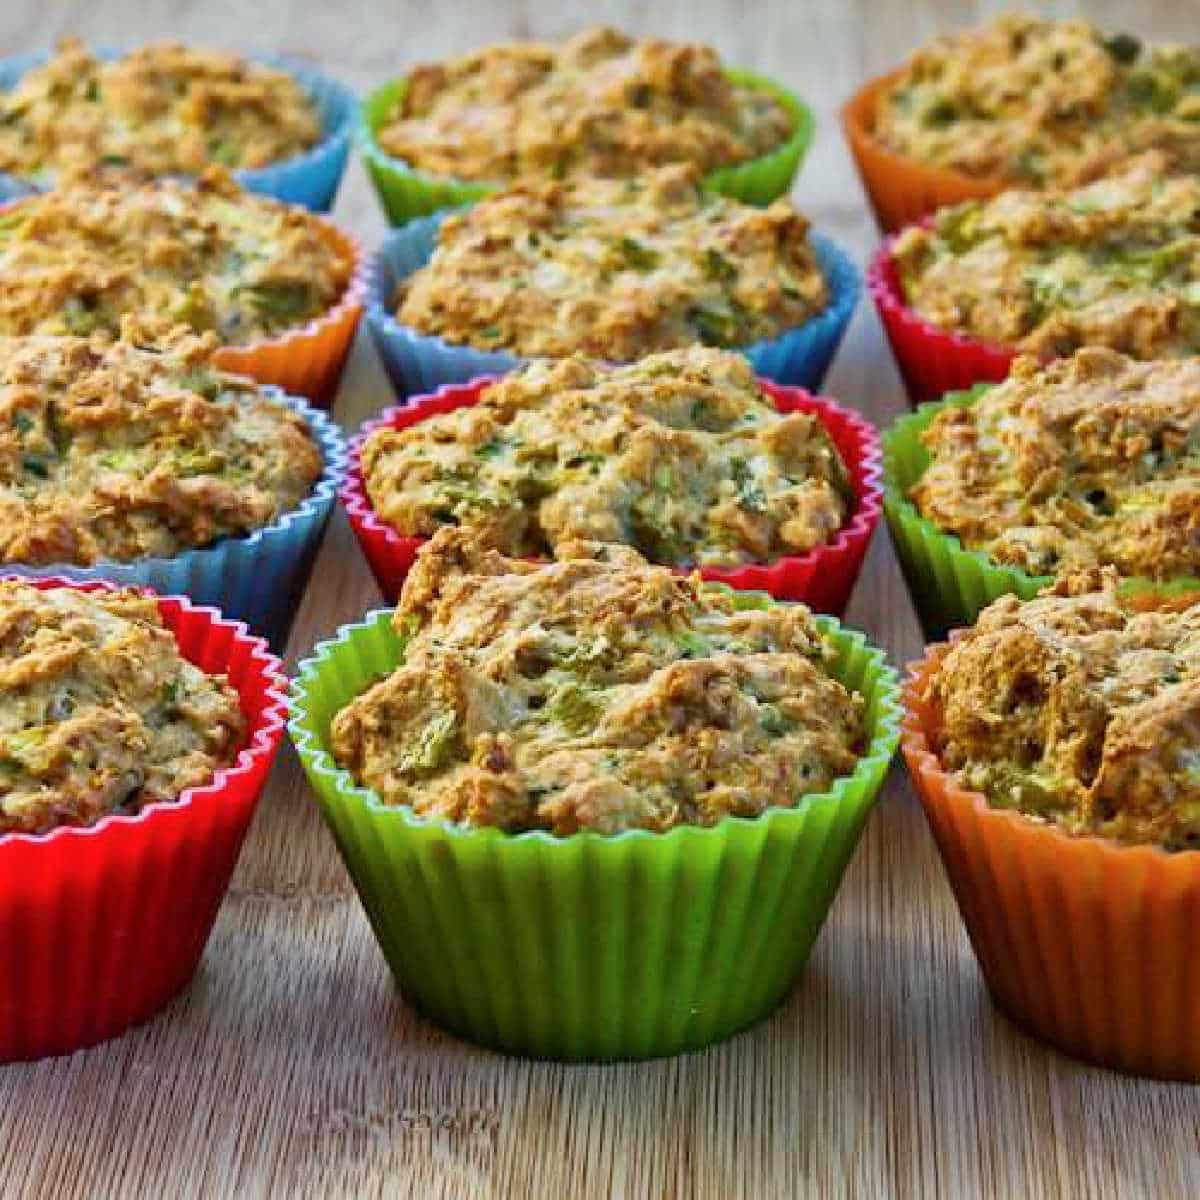 Savory Zucchini Muffins with Green Chiles shown lined up on cutting board